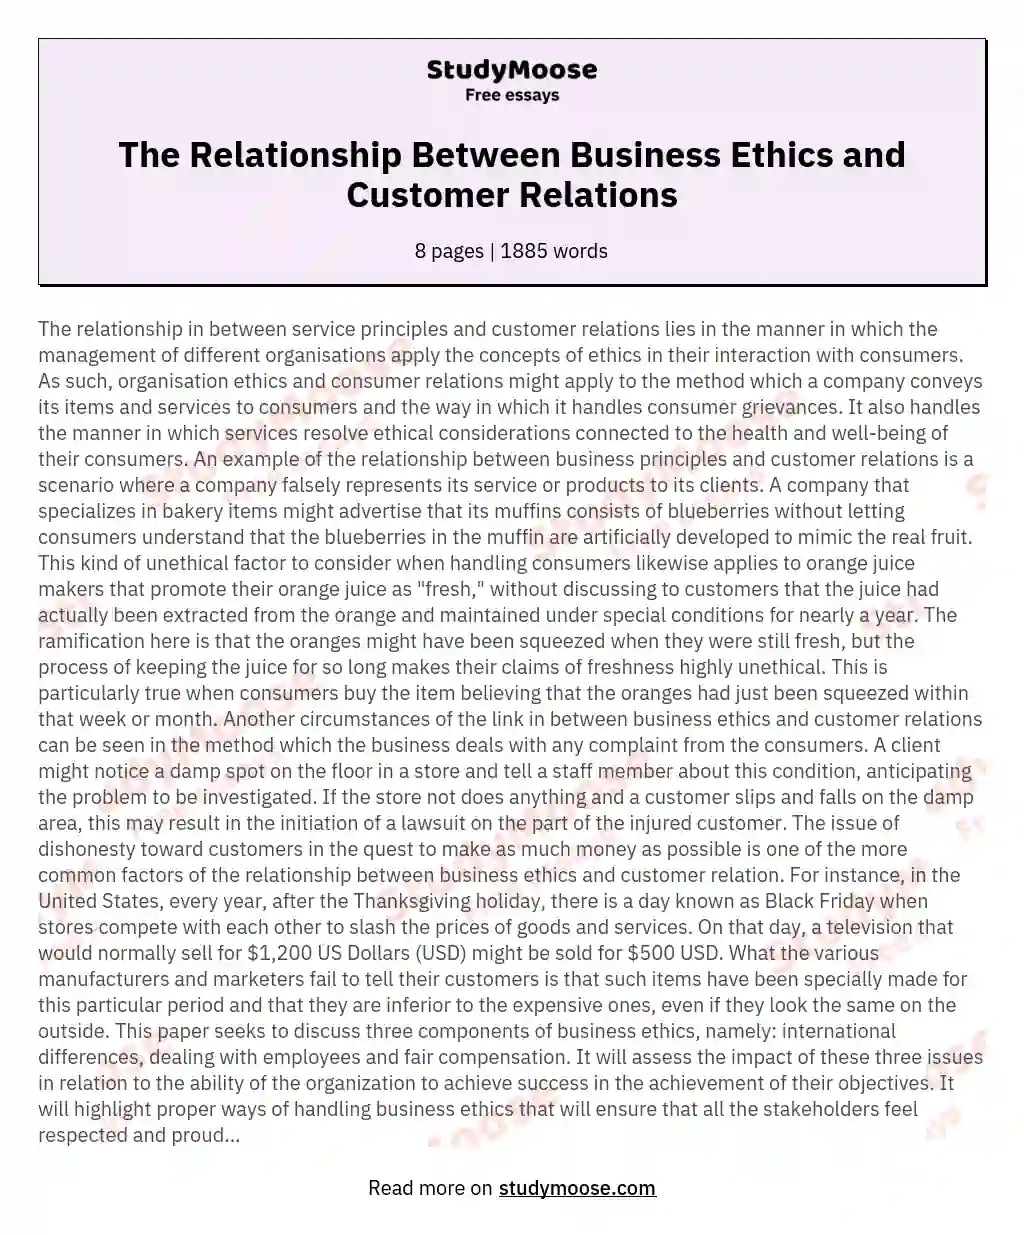 The Relationship Between Business Ethics and Customer Relations essay